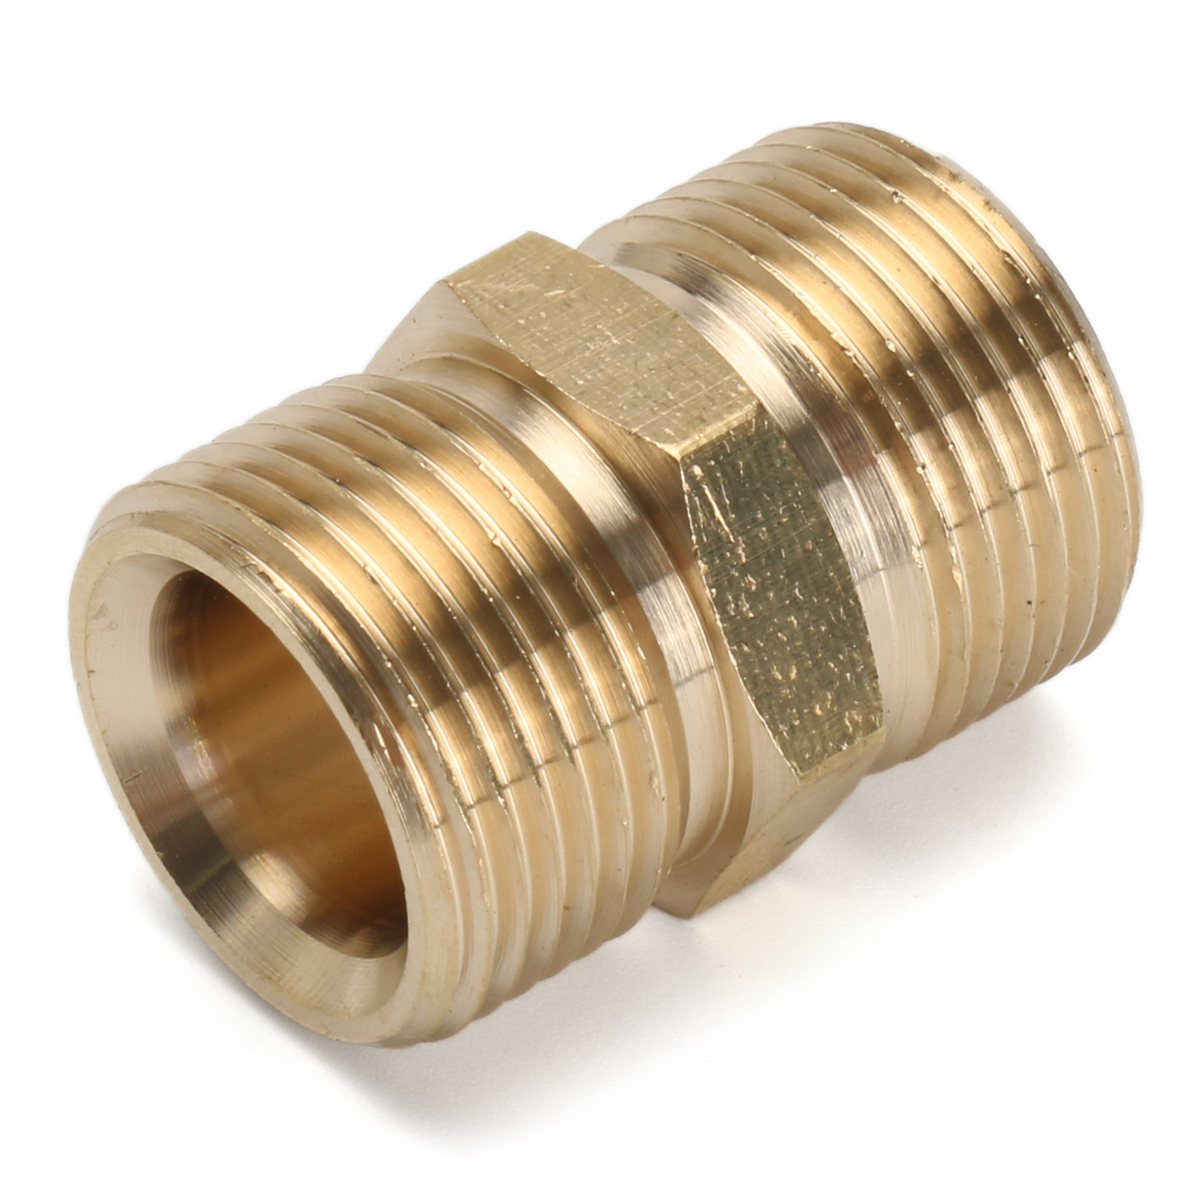 M22-Brass-Pressure-Washer-Adapter-Male-to-Male-Hose-Coulper-Fitting-for-Kacher-1172429